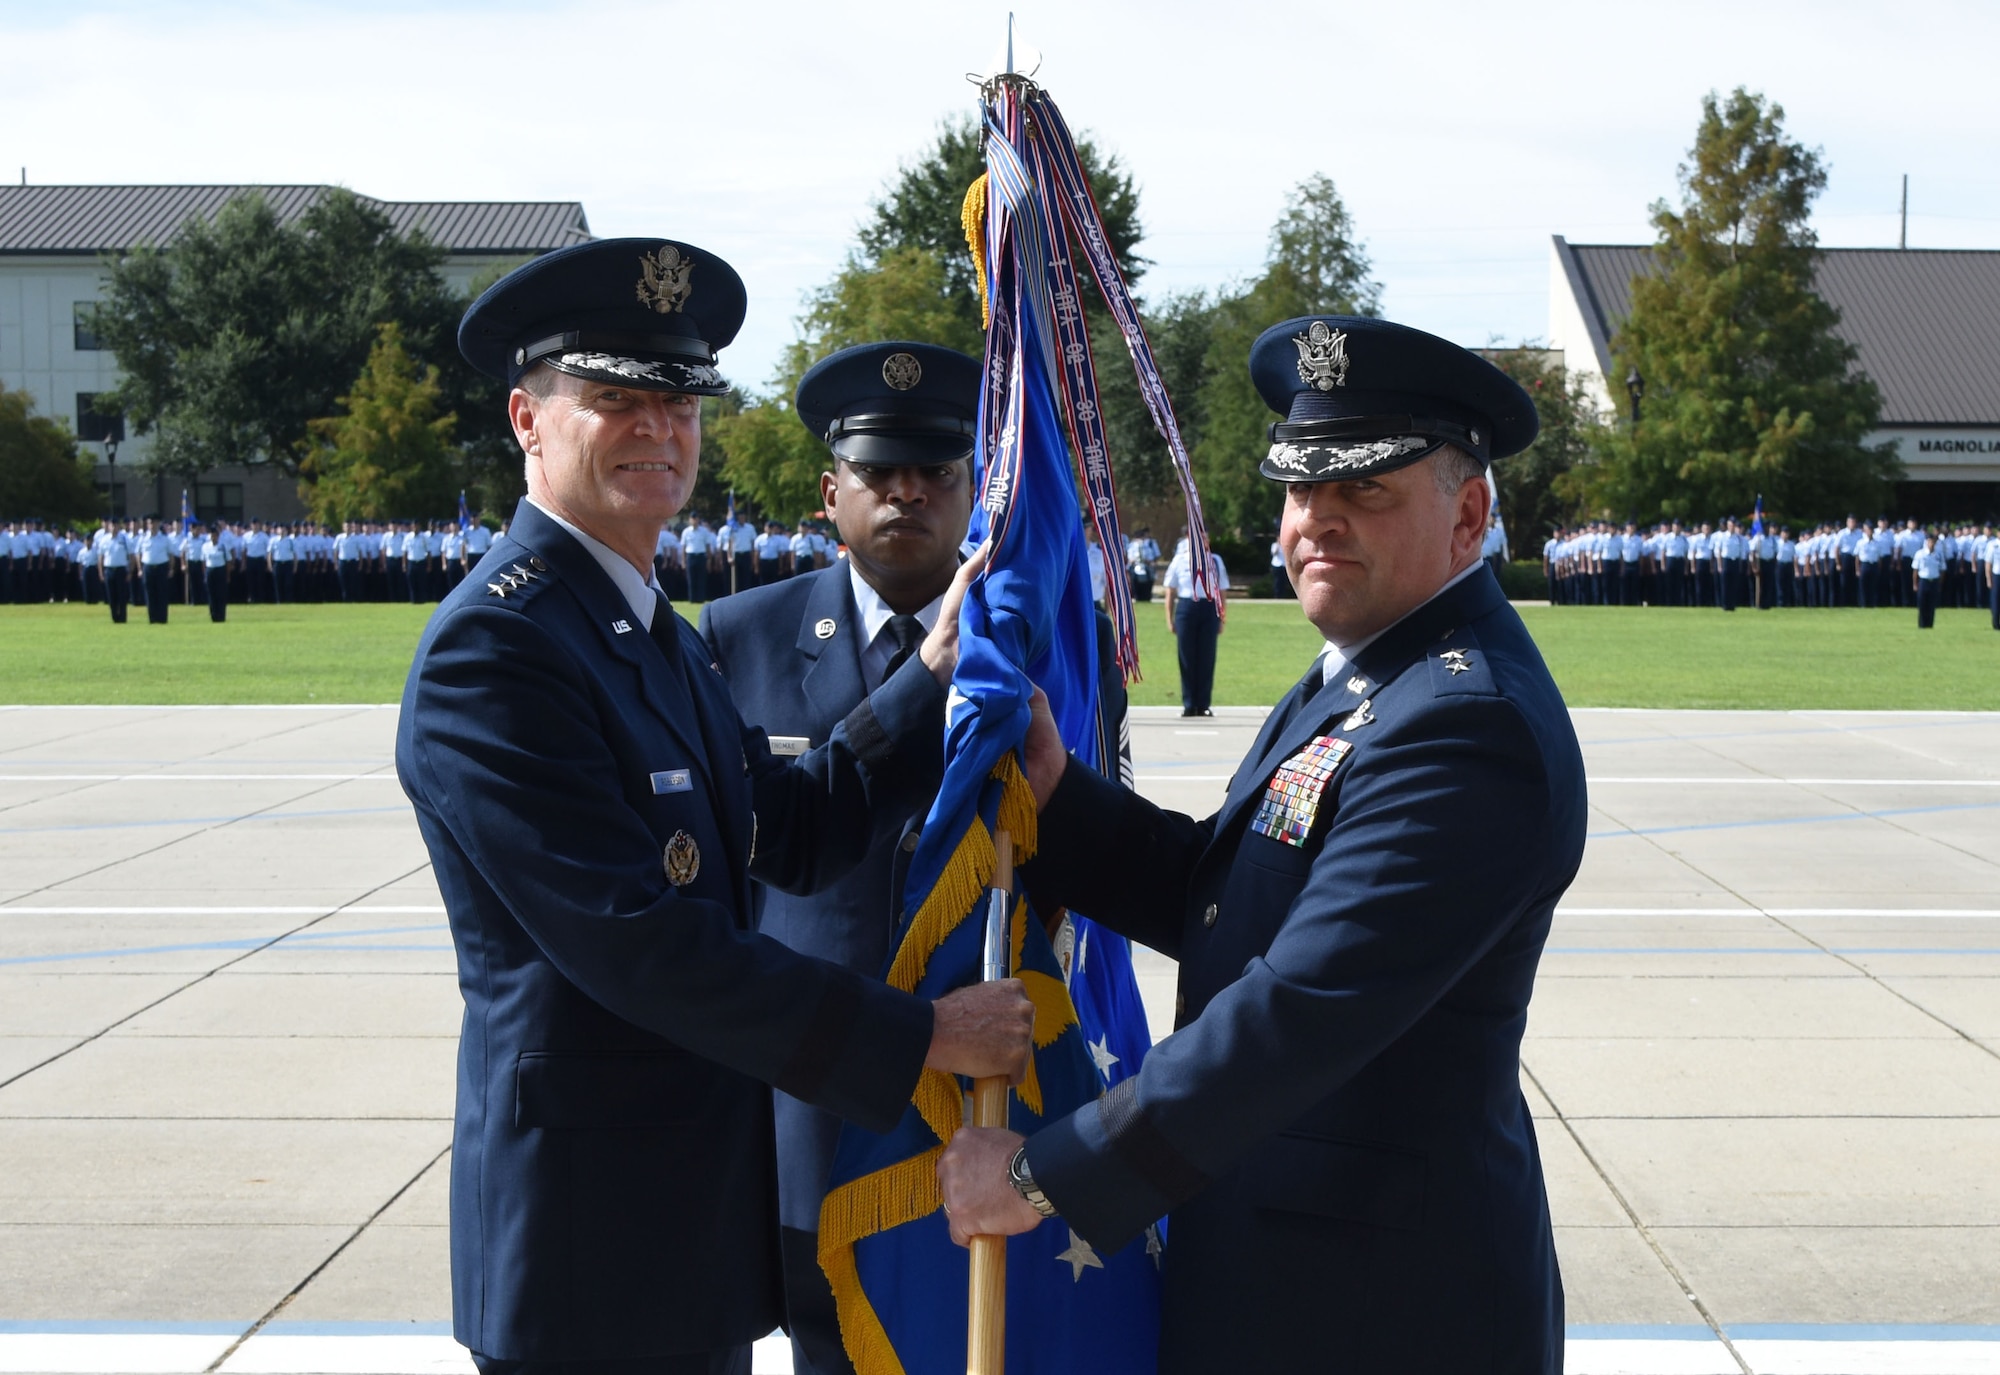 Lt. Gen. Darryl Roberson, commander of Air Education and Training Command commander, passes the 2nd Air Force guidon to Maj. Gen. Timothy Leahy, 2nd AF commander, during the 2nd AF change of command ceremony at the Levitow Training Support Facility Aug. 23, 2017, on Keesler Air Force Base, Miss. L (U.S. Air Force photo by Kemberly Groue)